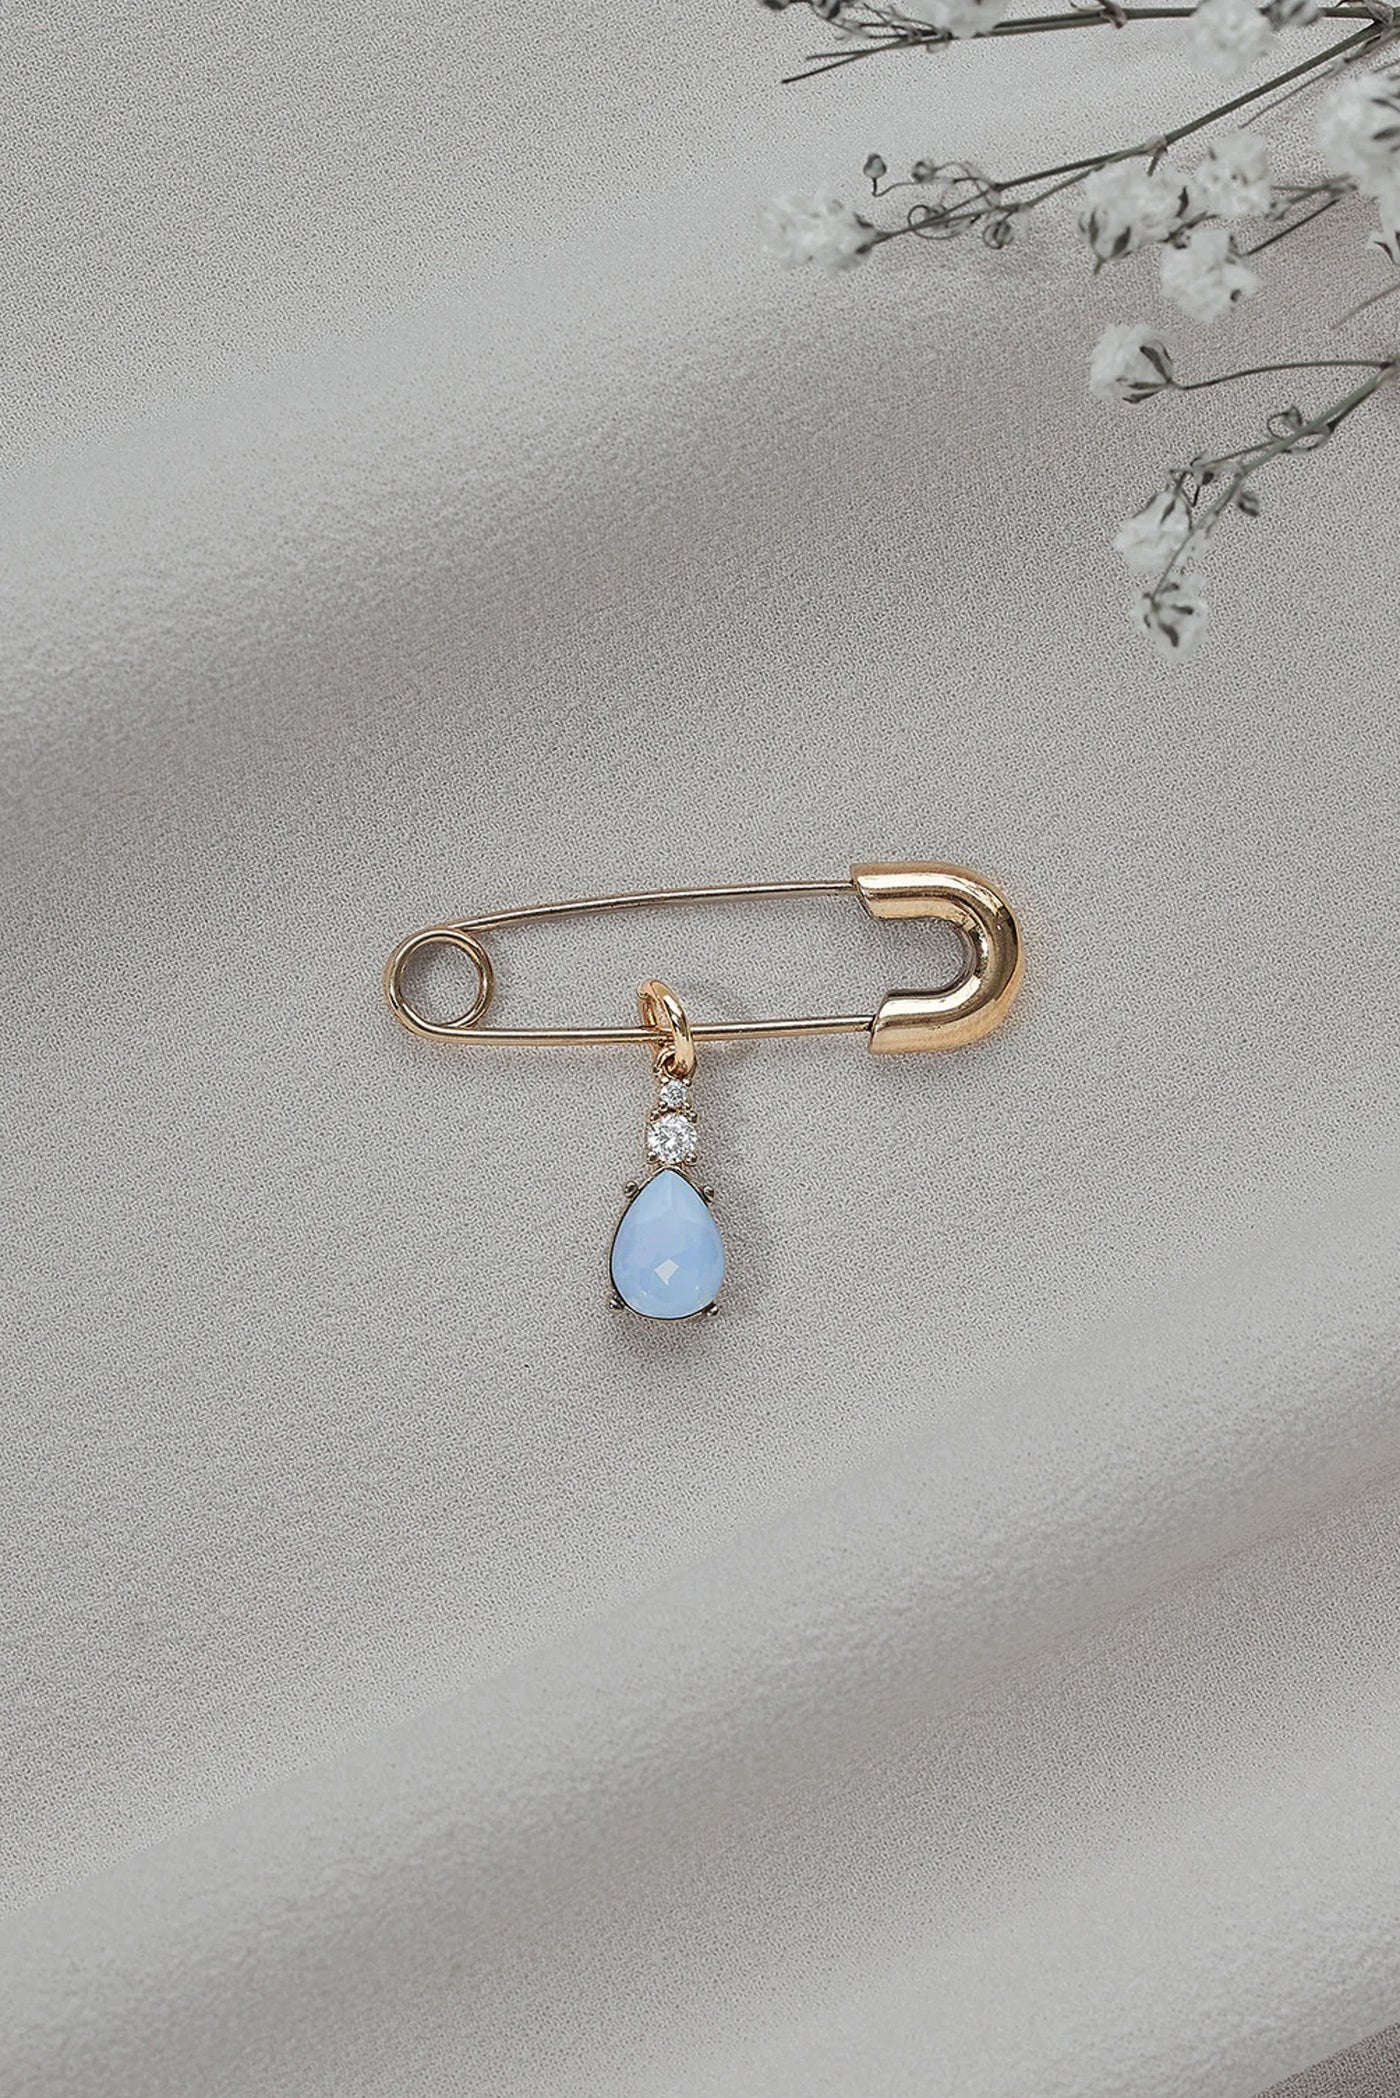 A basic shot of a "something blue" pin featuring a baby blue teardrop gem.